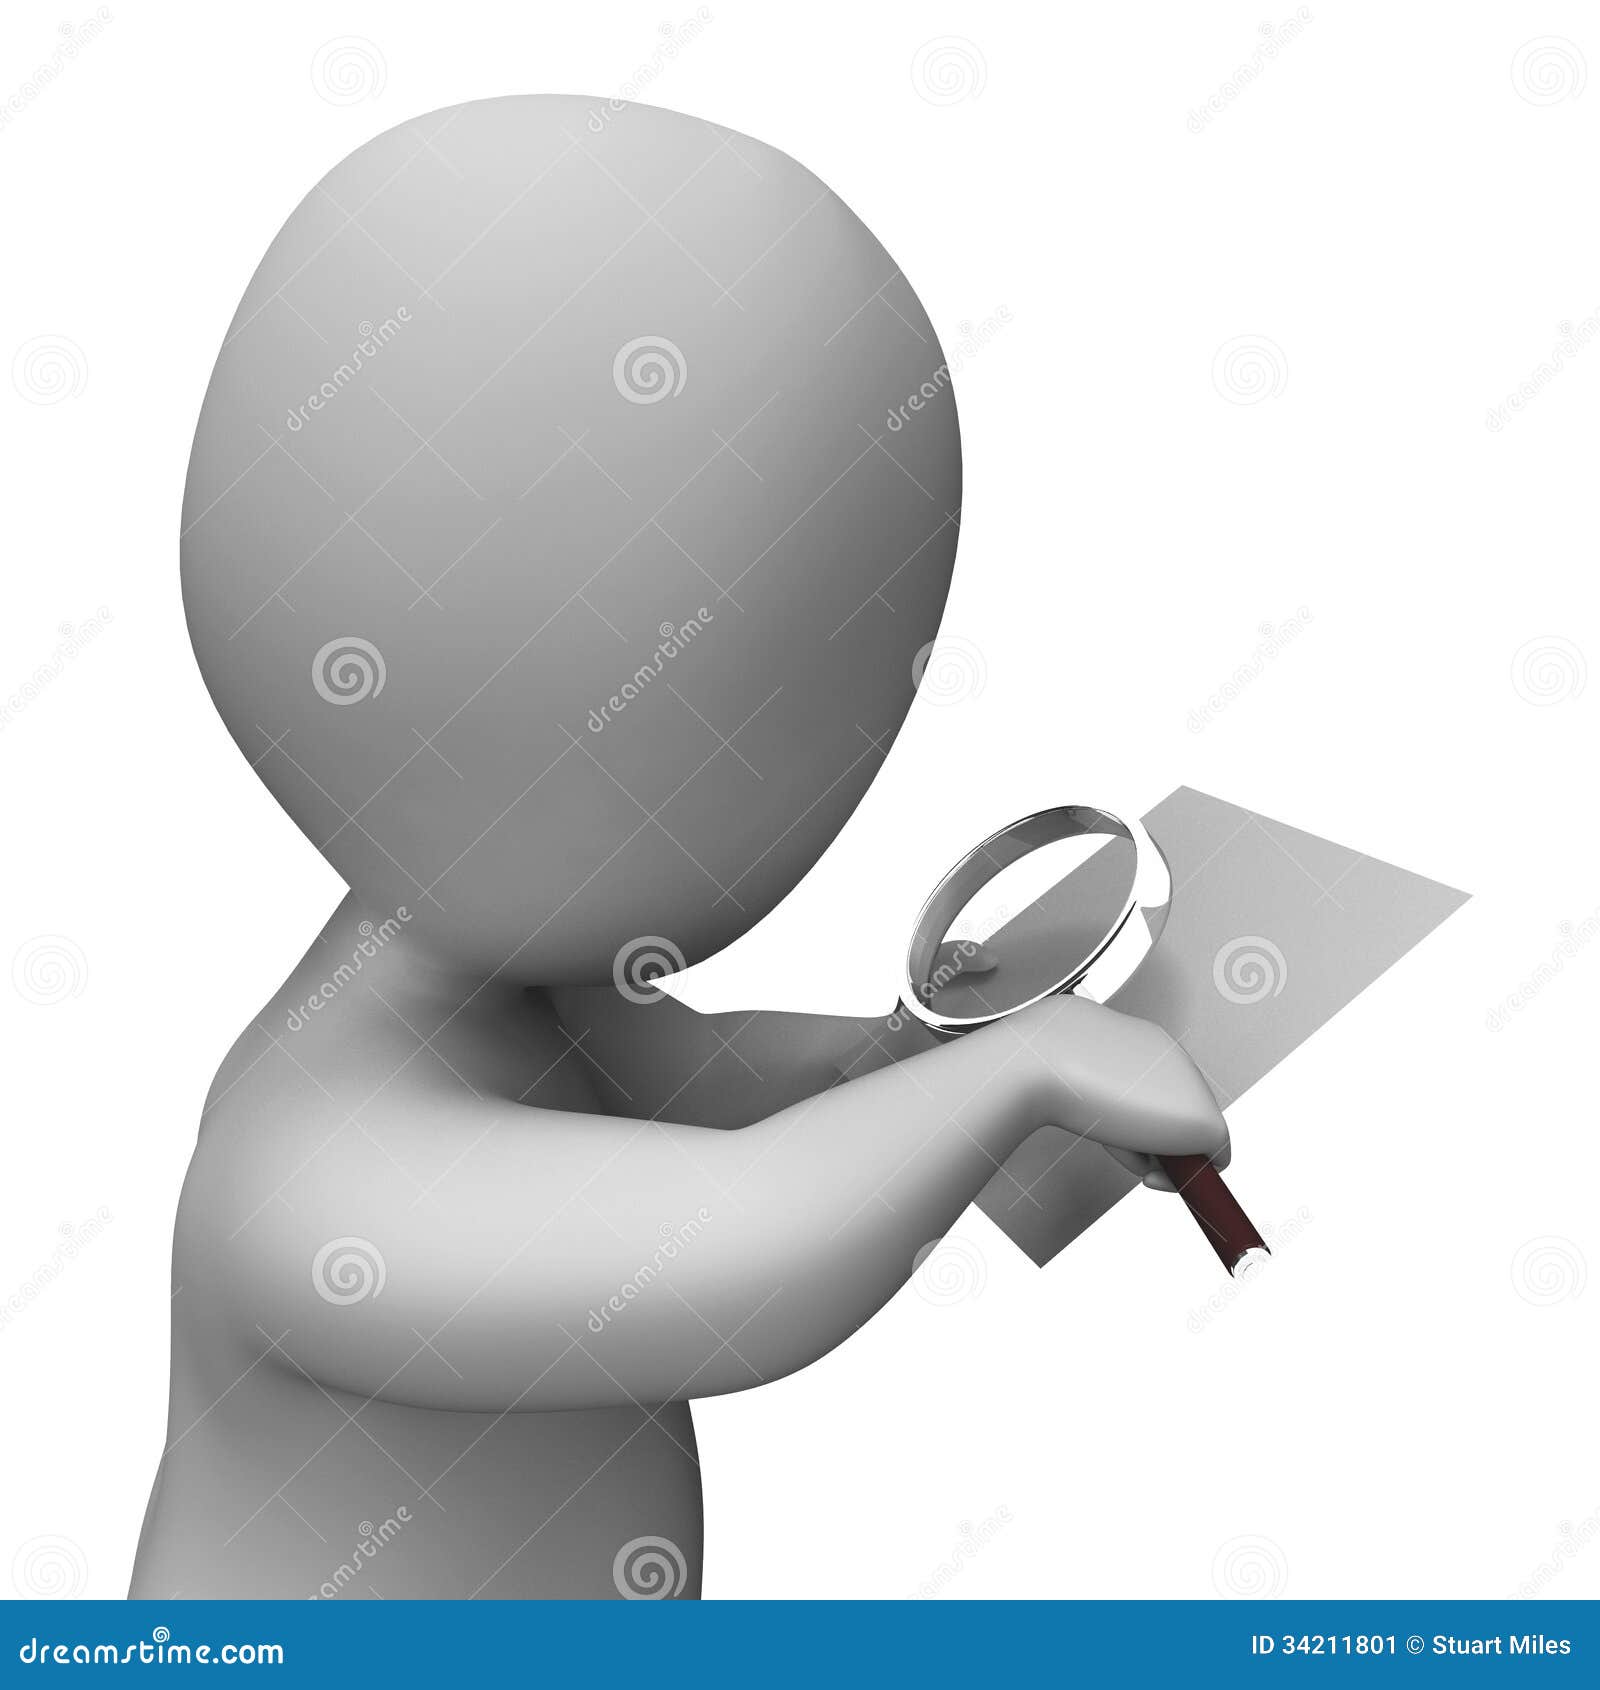 looking-magnifier-document-character-shows-investigation-investi-showing-investigate-investigating-34211801.jpg